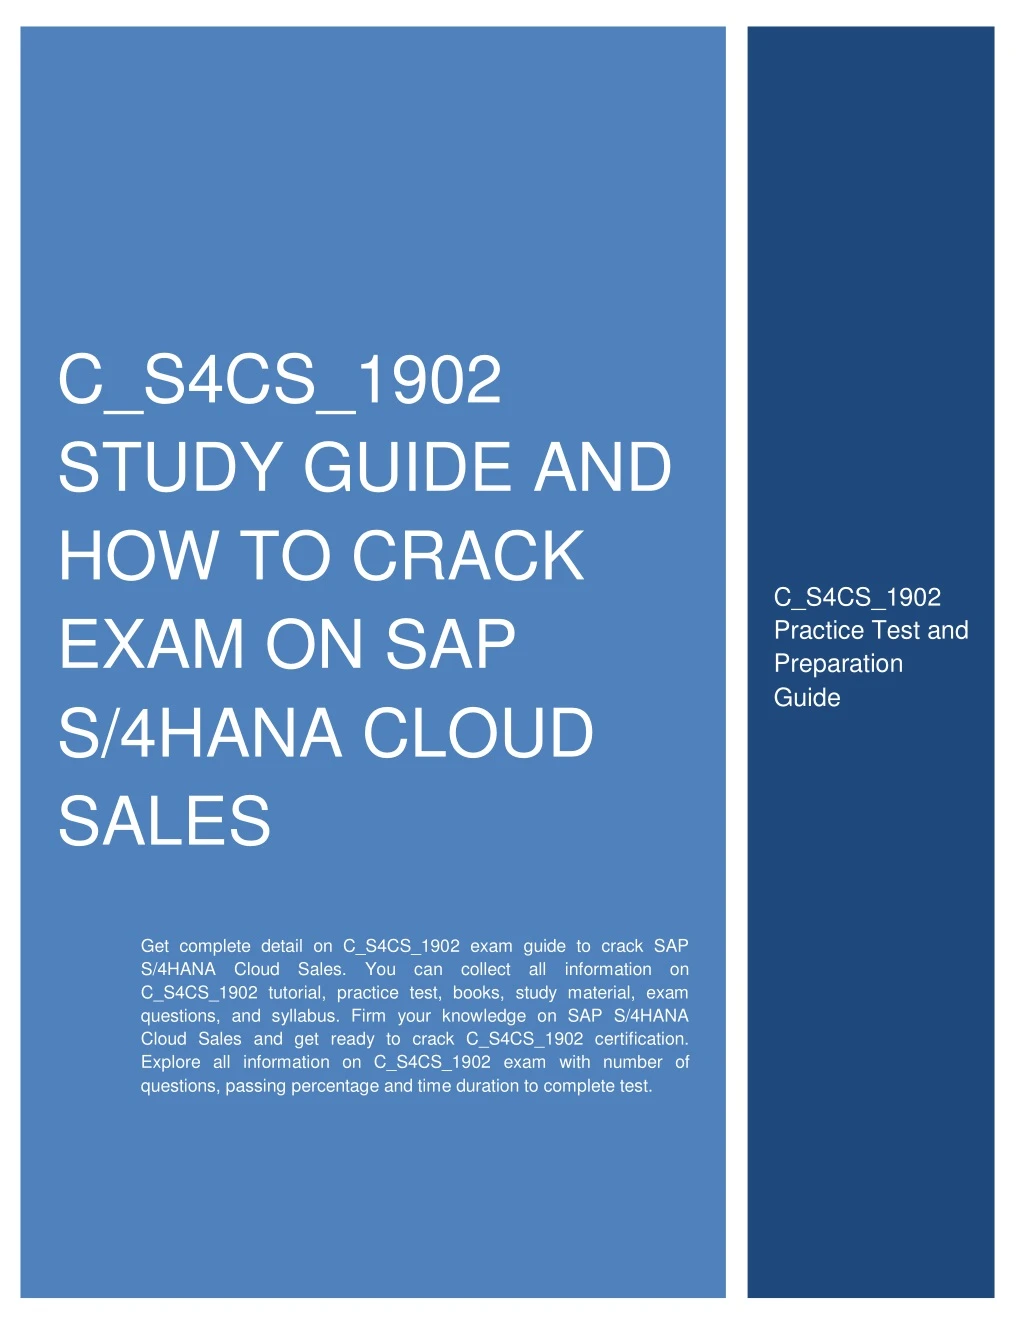 c s4cs 1902 study guide and how to crack exam